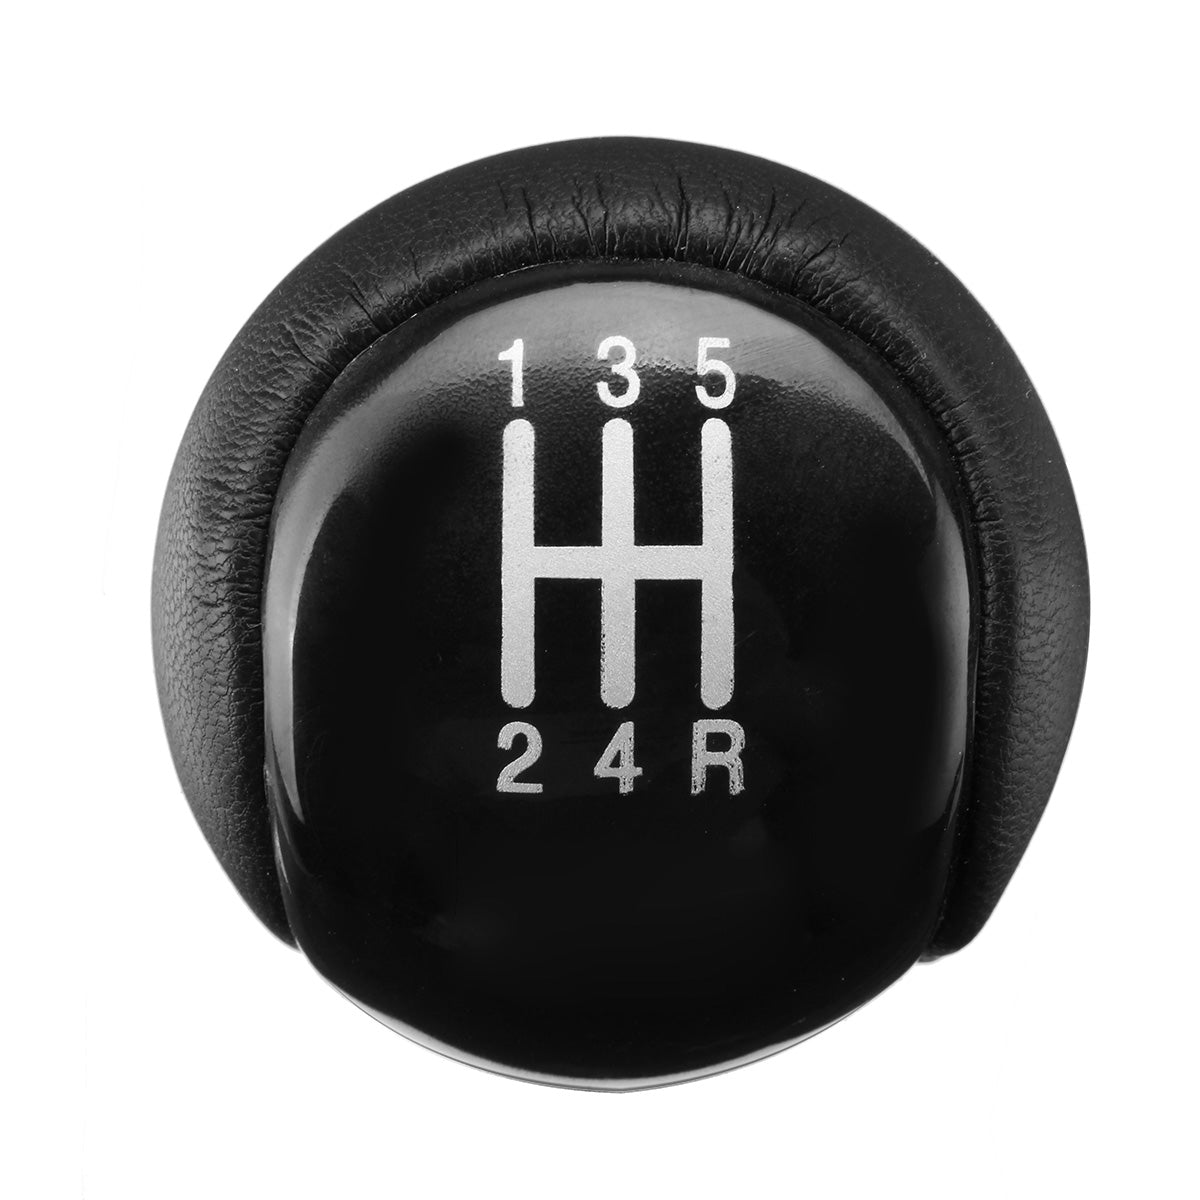 Black 5 Speed Gear Shift Knob Stick PU leather for Ford Fiesta Fusion Transit Connect 2002 UP